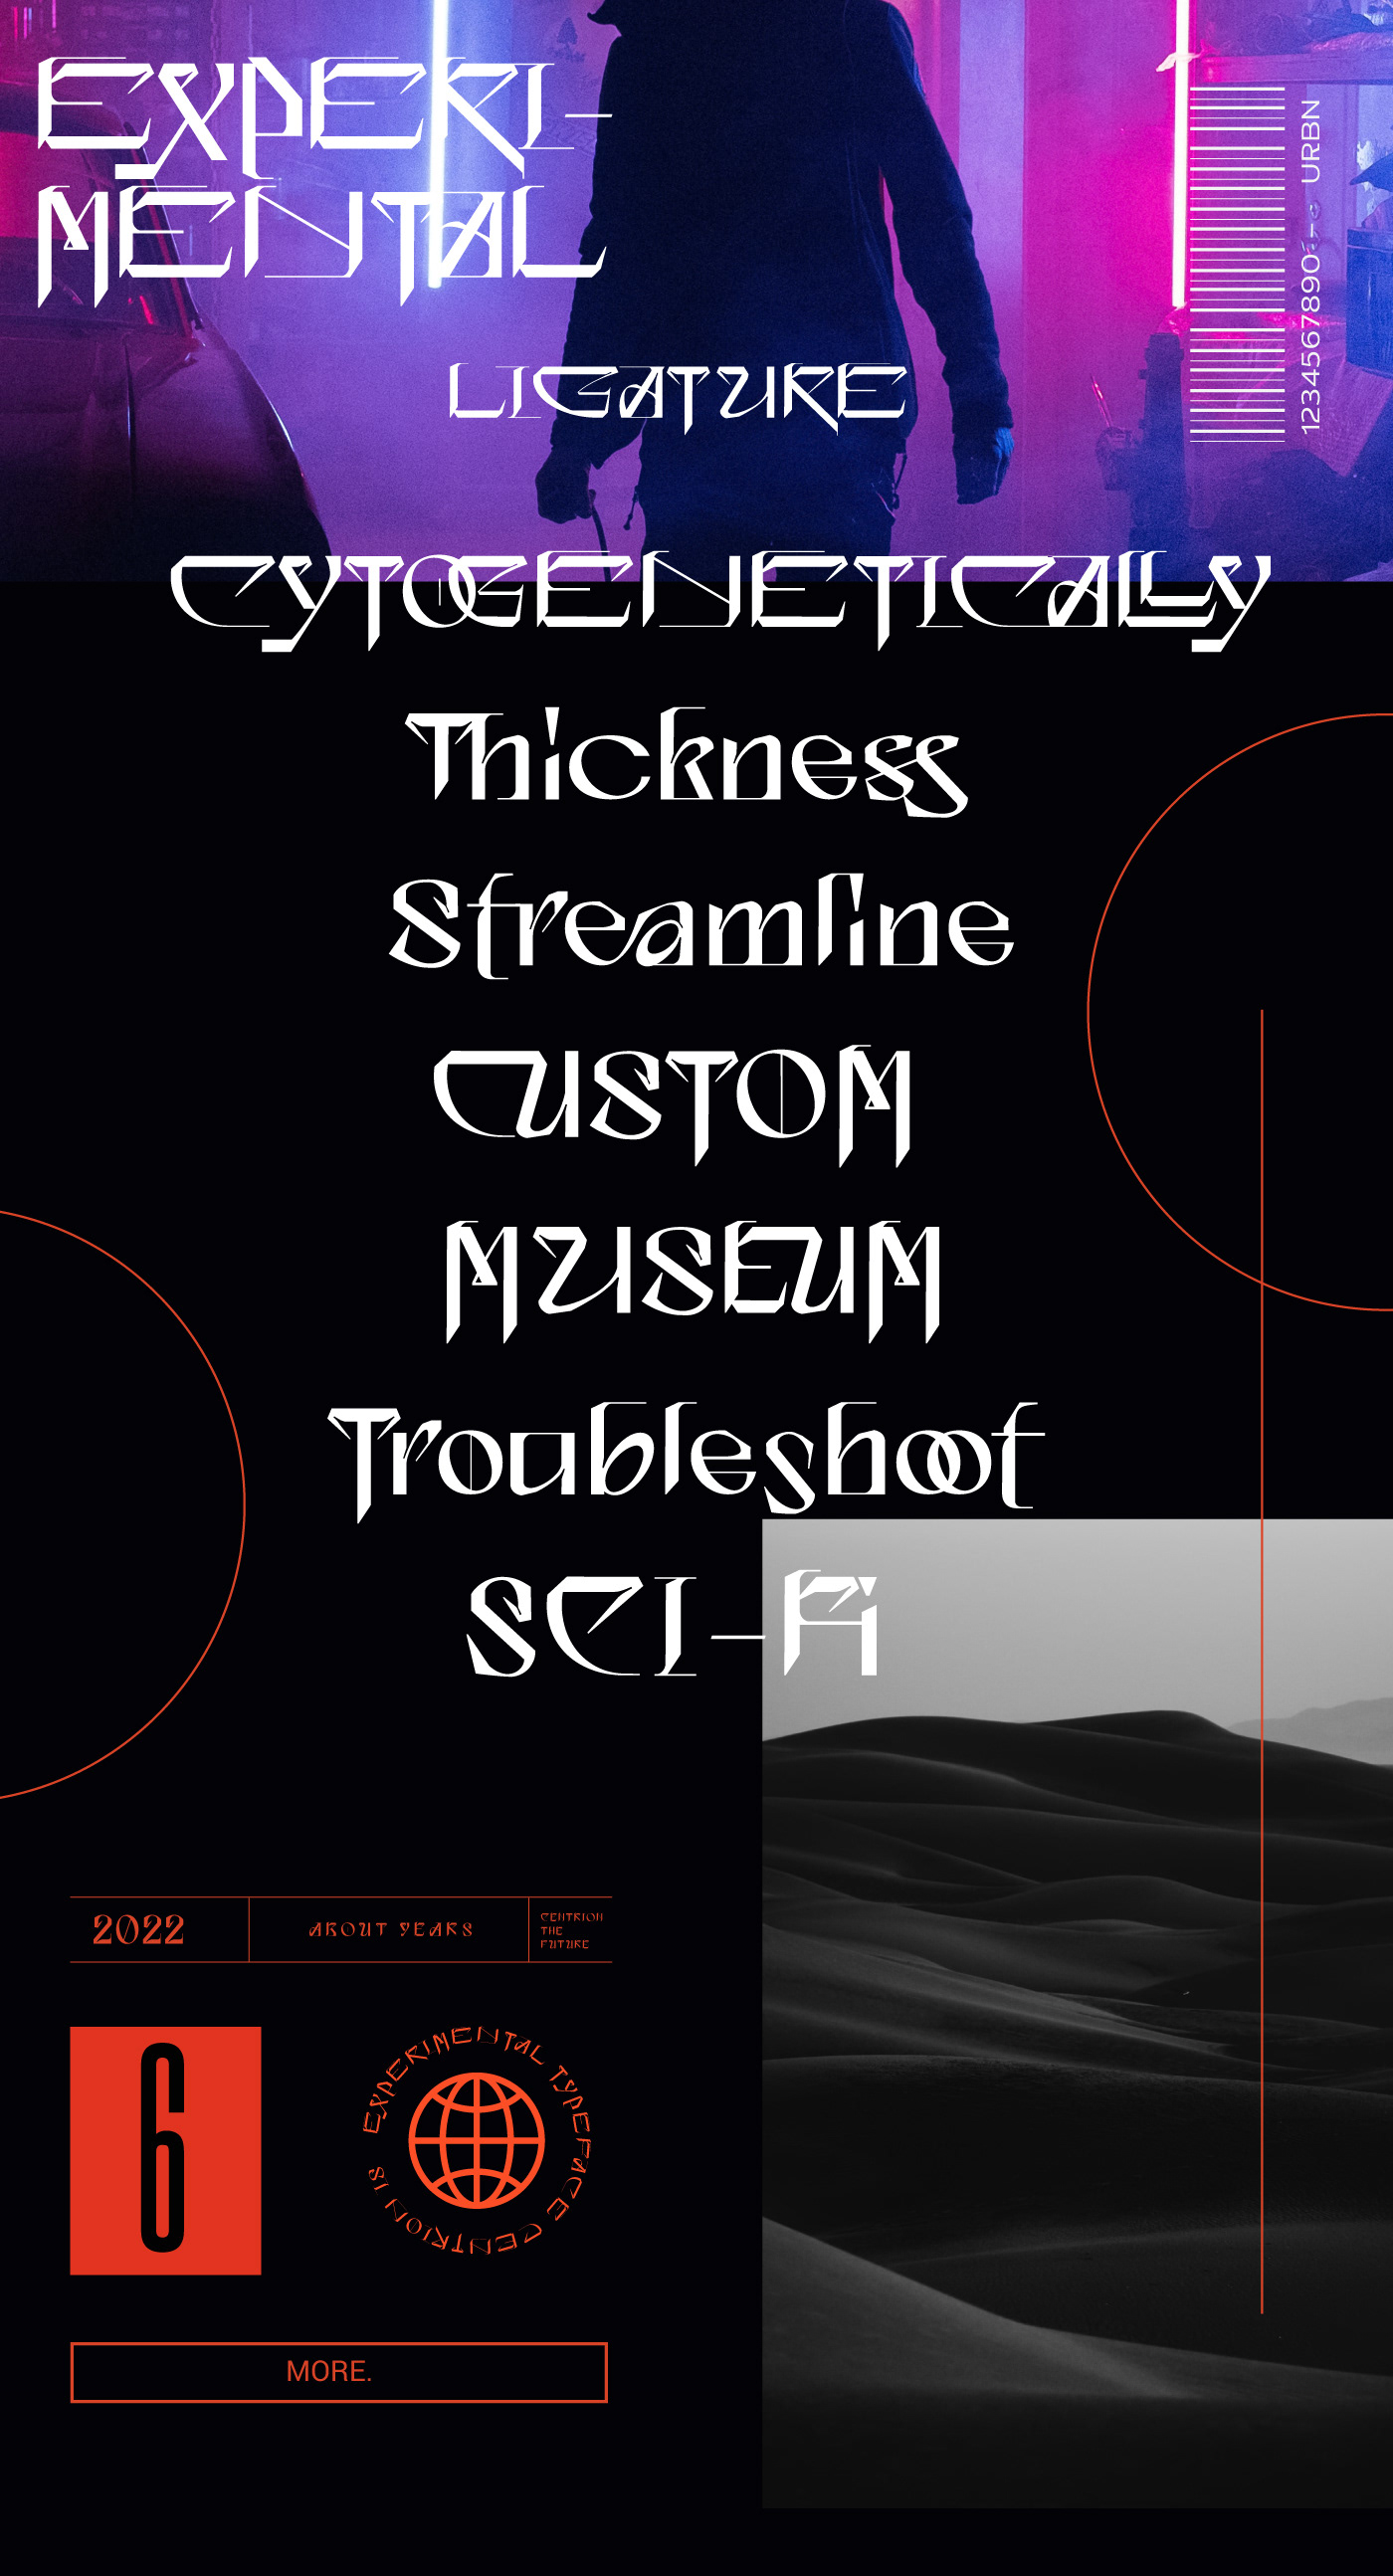 Brutalism Cyber font Cyberpunk experimental Free font free typeface FUTURISM futuristic font Typeface typography  